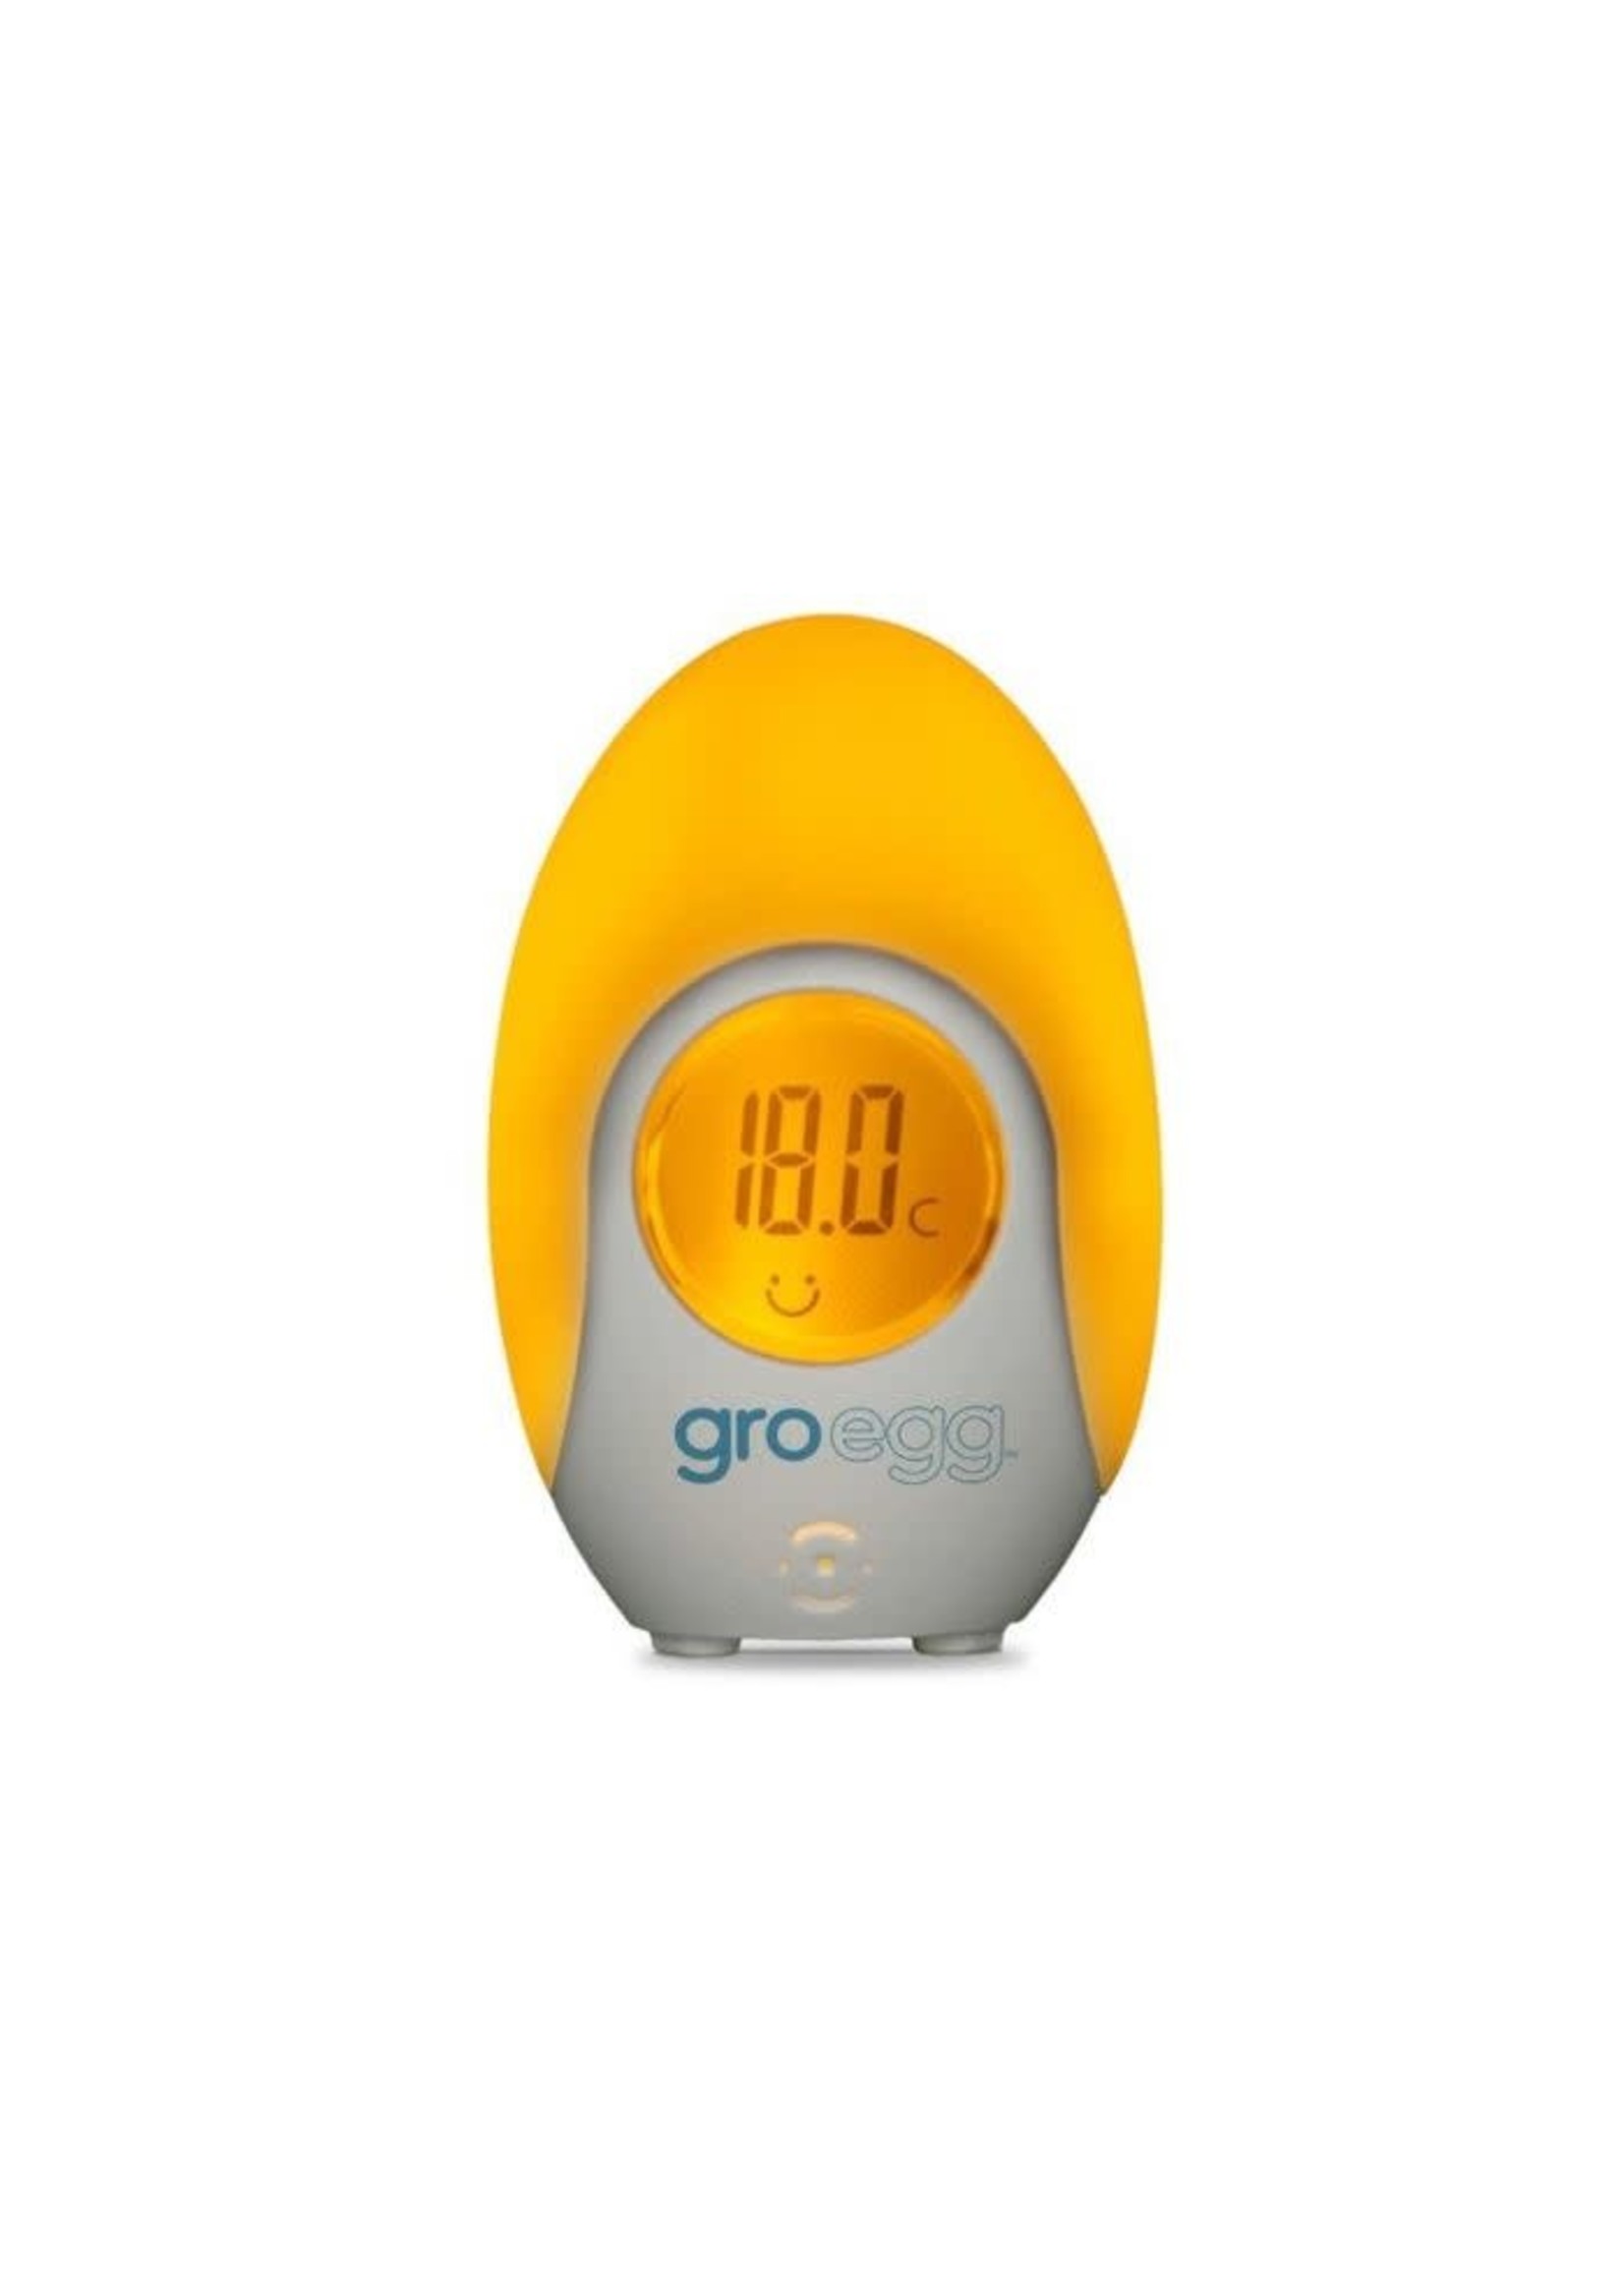 Haven Pharmacy Burkes - Back in stock. The Gro-egg digital room thermometer.  Peace of mind at just a quick look - this very clever little grobag egg  changes colour to let you